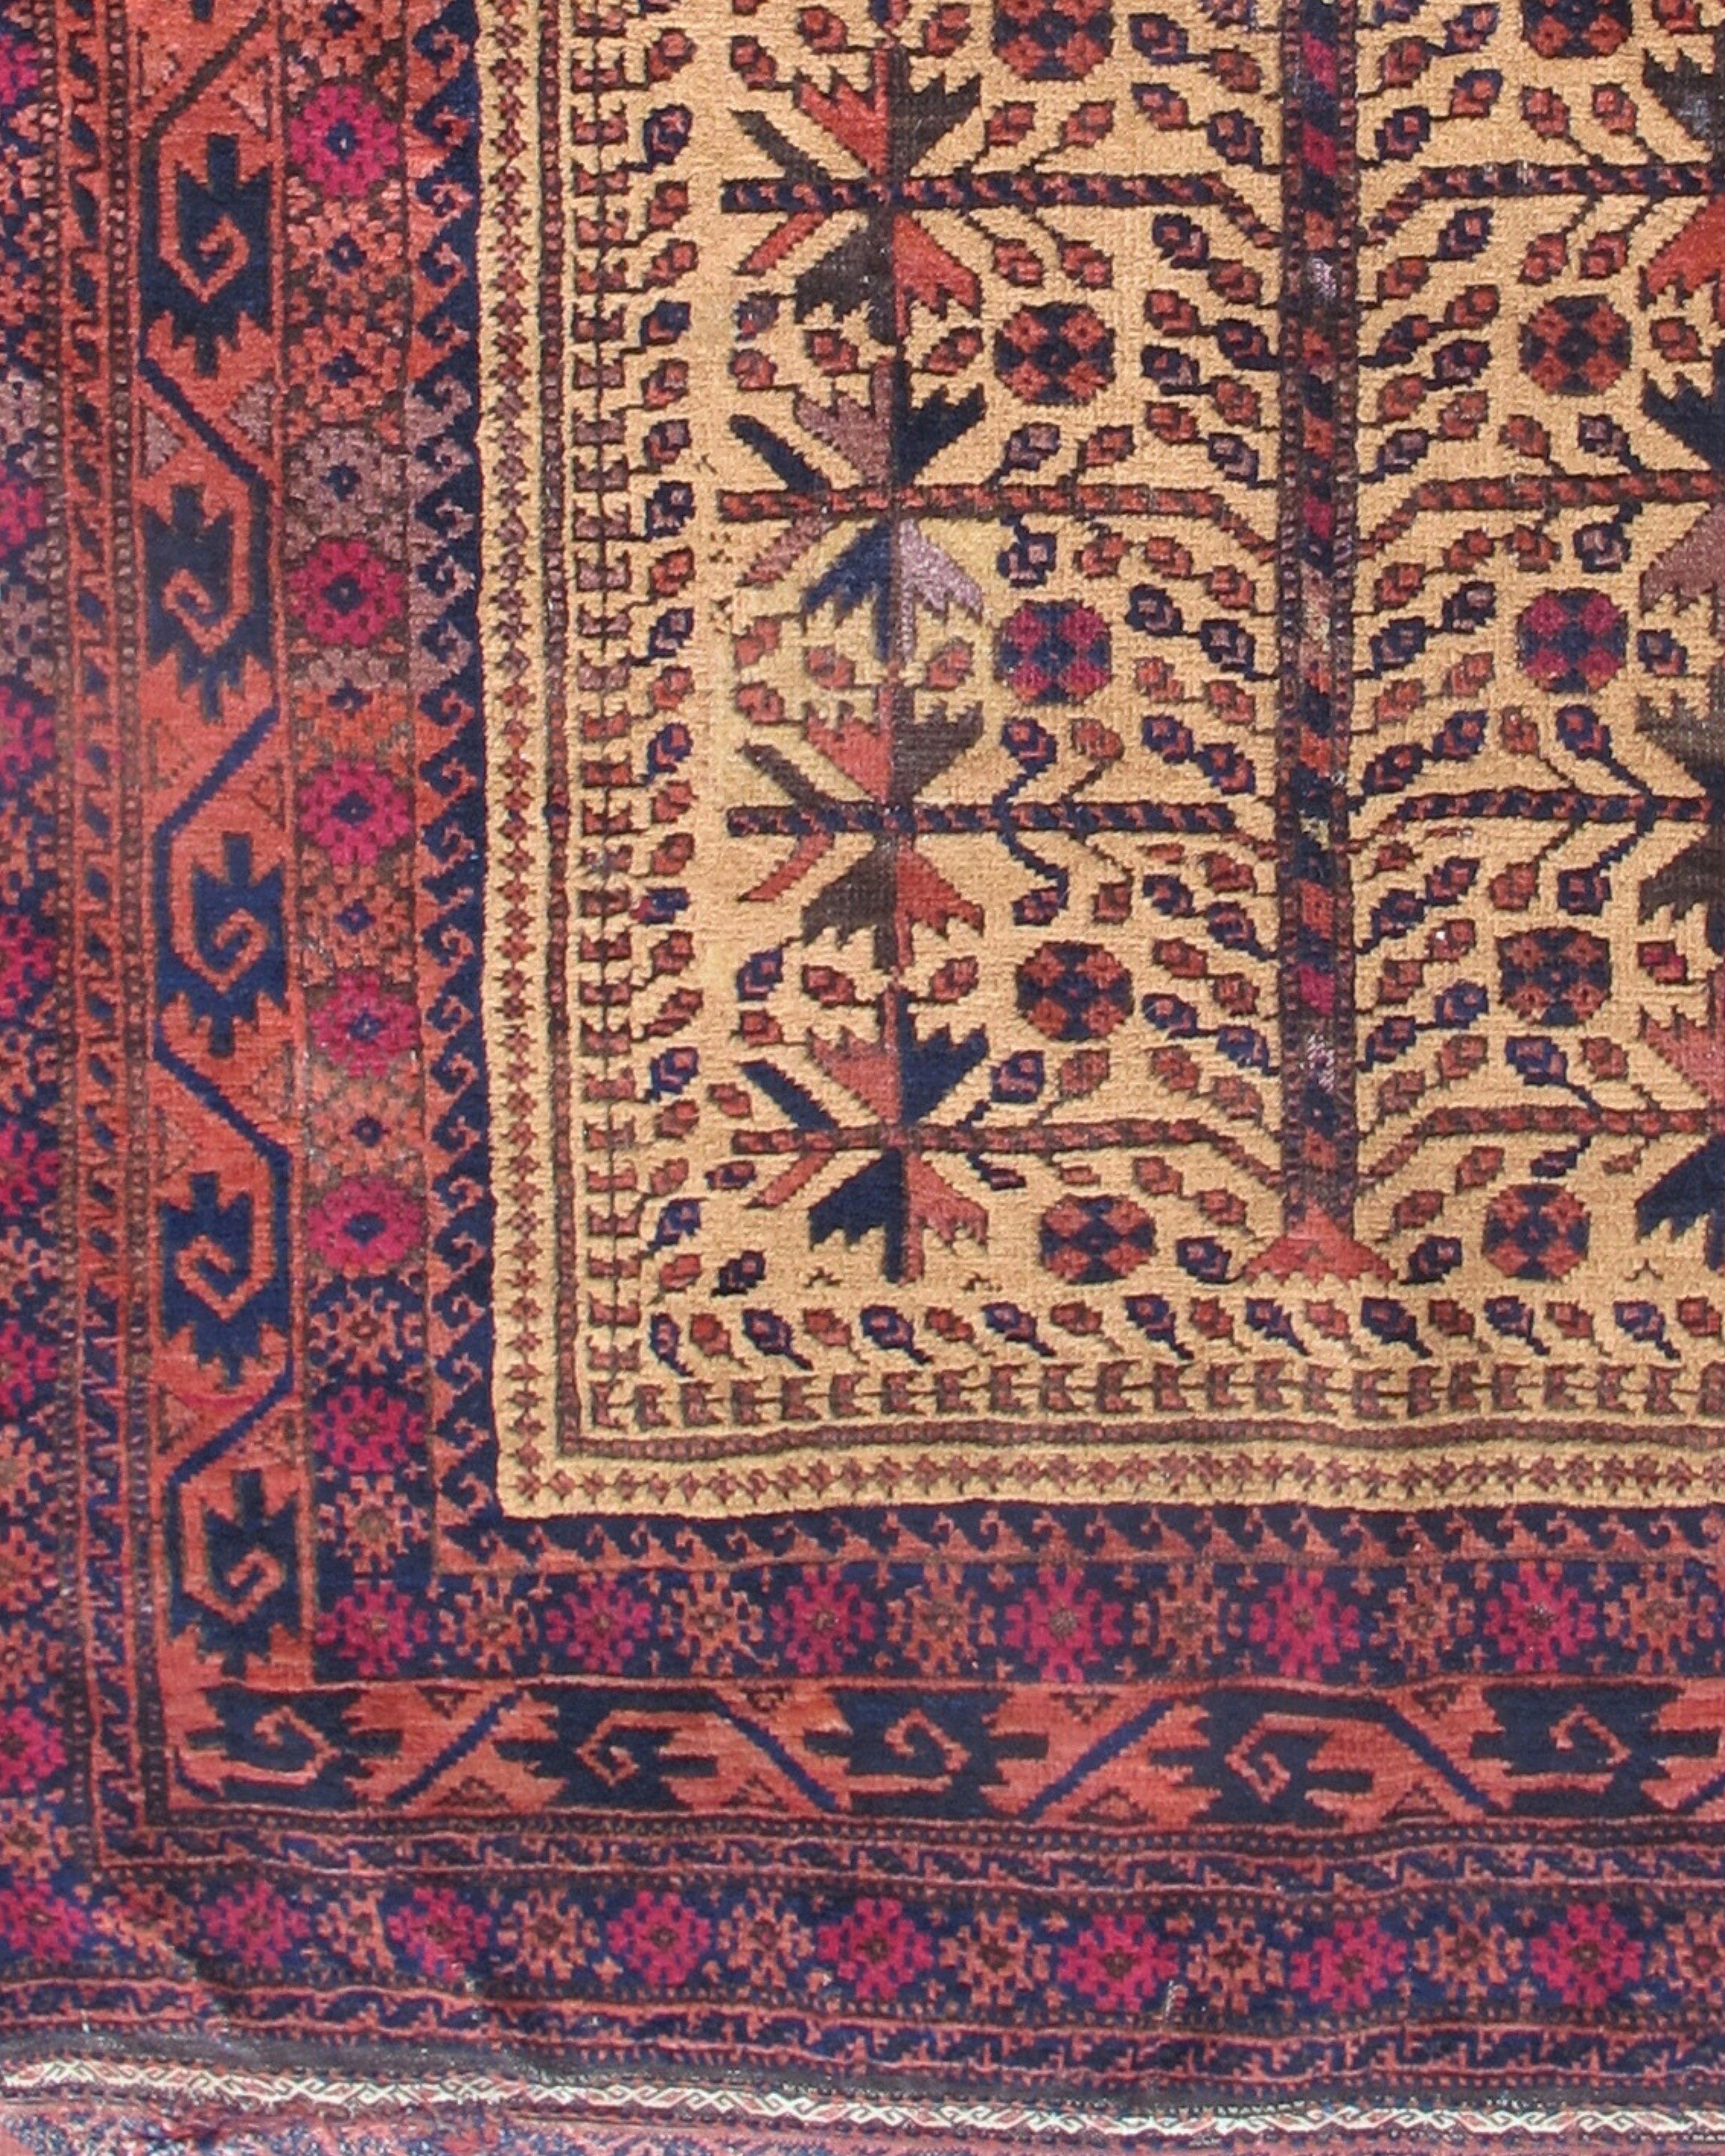 19th Century Antique Persian Baluch Prayer Rug, c. 1900 For Sale